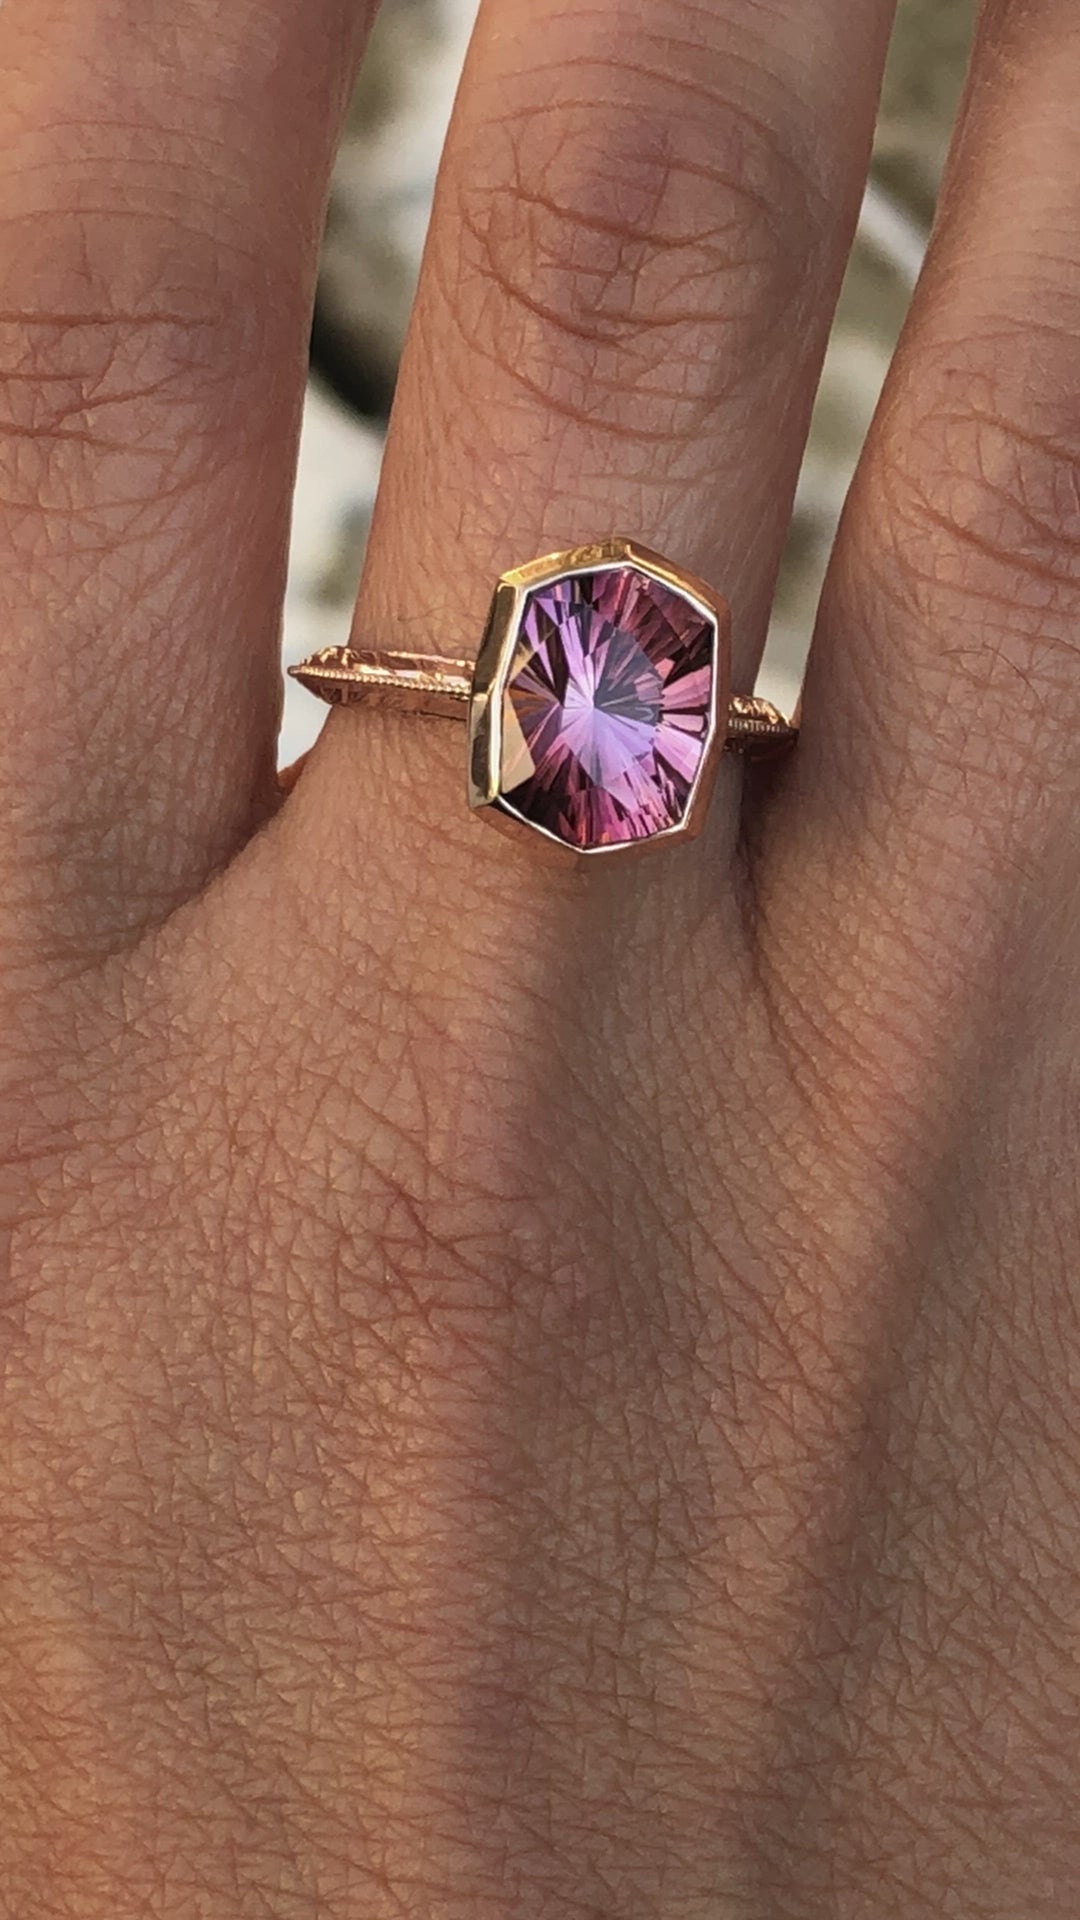 Medium/Heavy Weight Engraved Solitaire Bezel Ring Setting - Malkhan Tourmaline Depicted (Setting Only, Center Stone Sold Separately)